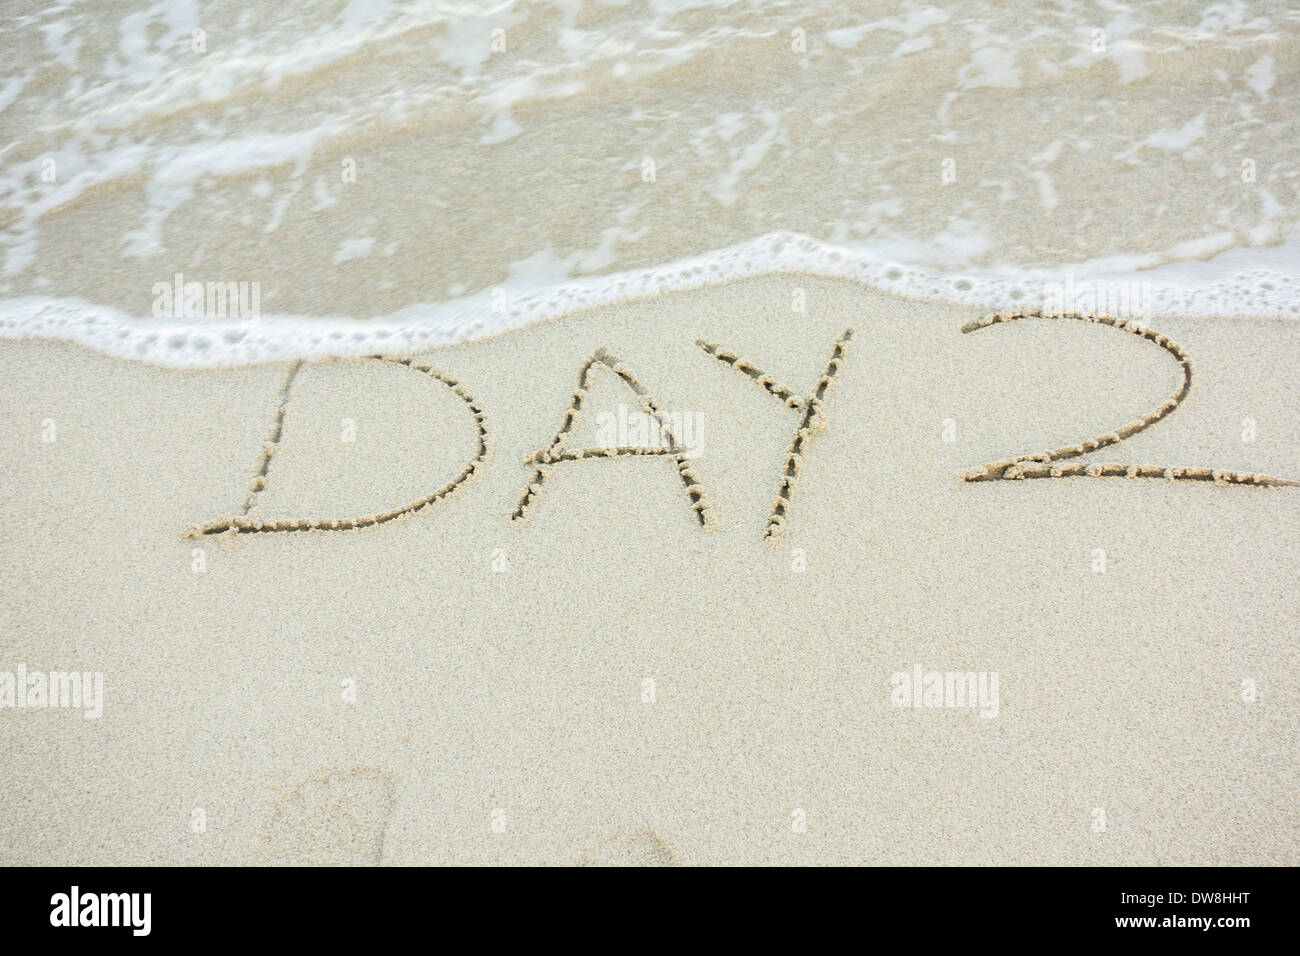 A message written in the beach sand on the west end of St. Croix, U. S. Virgin Islands, saying 'Day 2'. Stock Photo